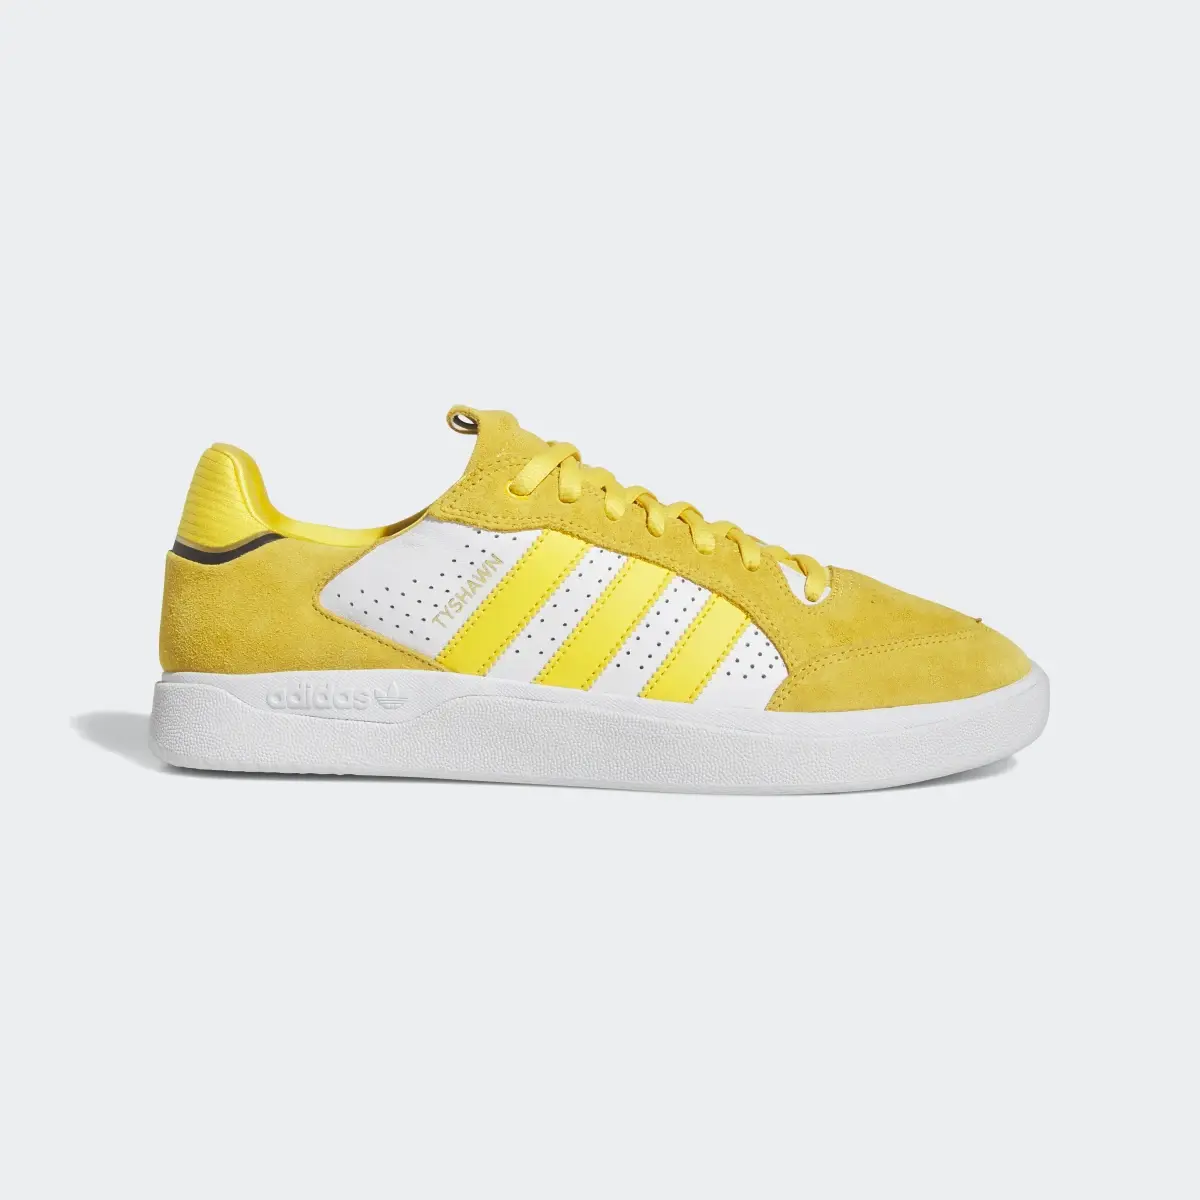 Adidas Tyshawn Low Shoes. 2